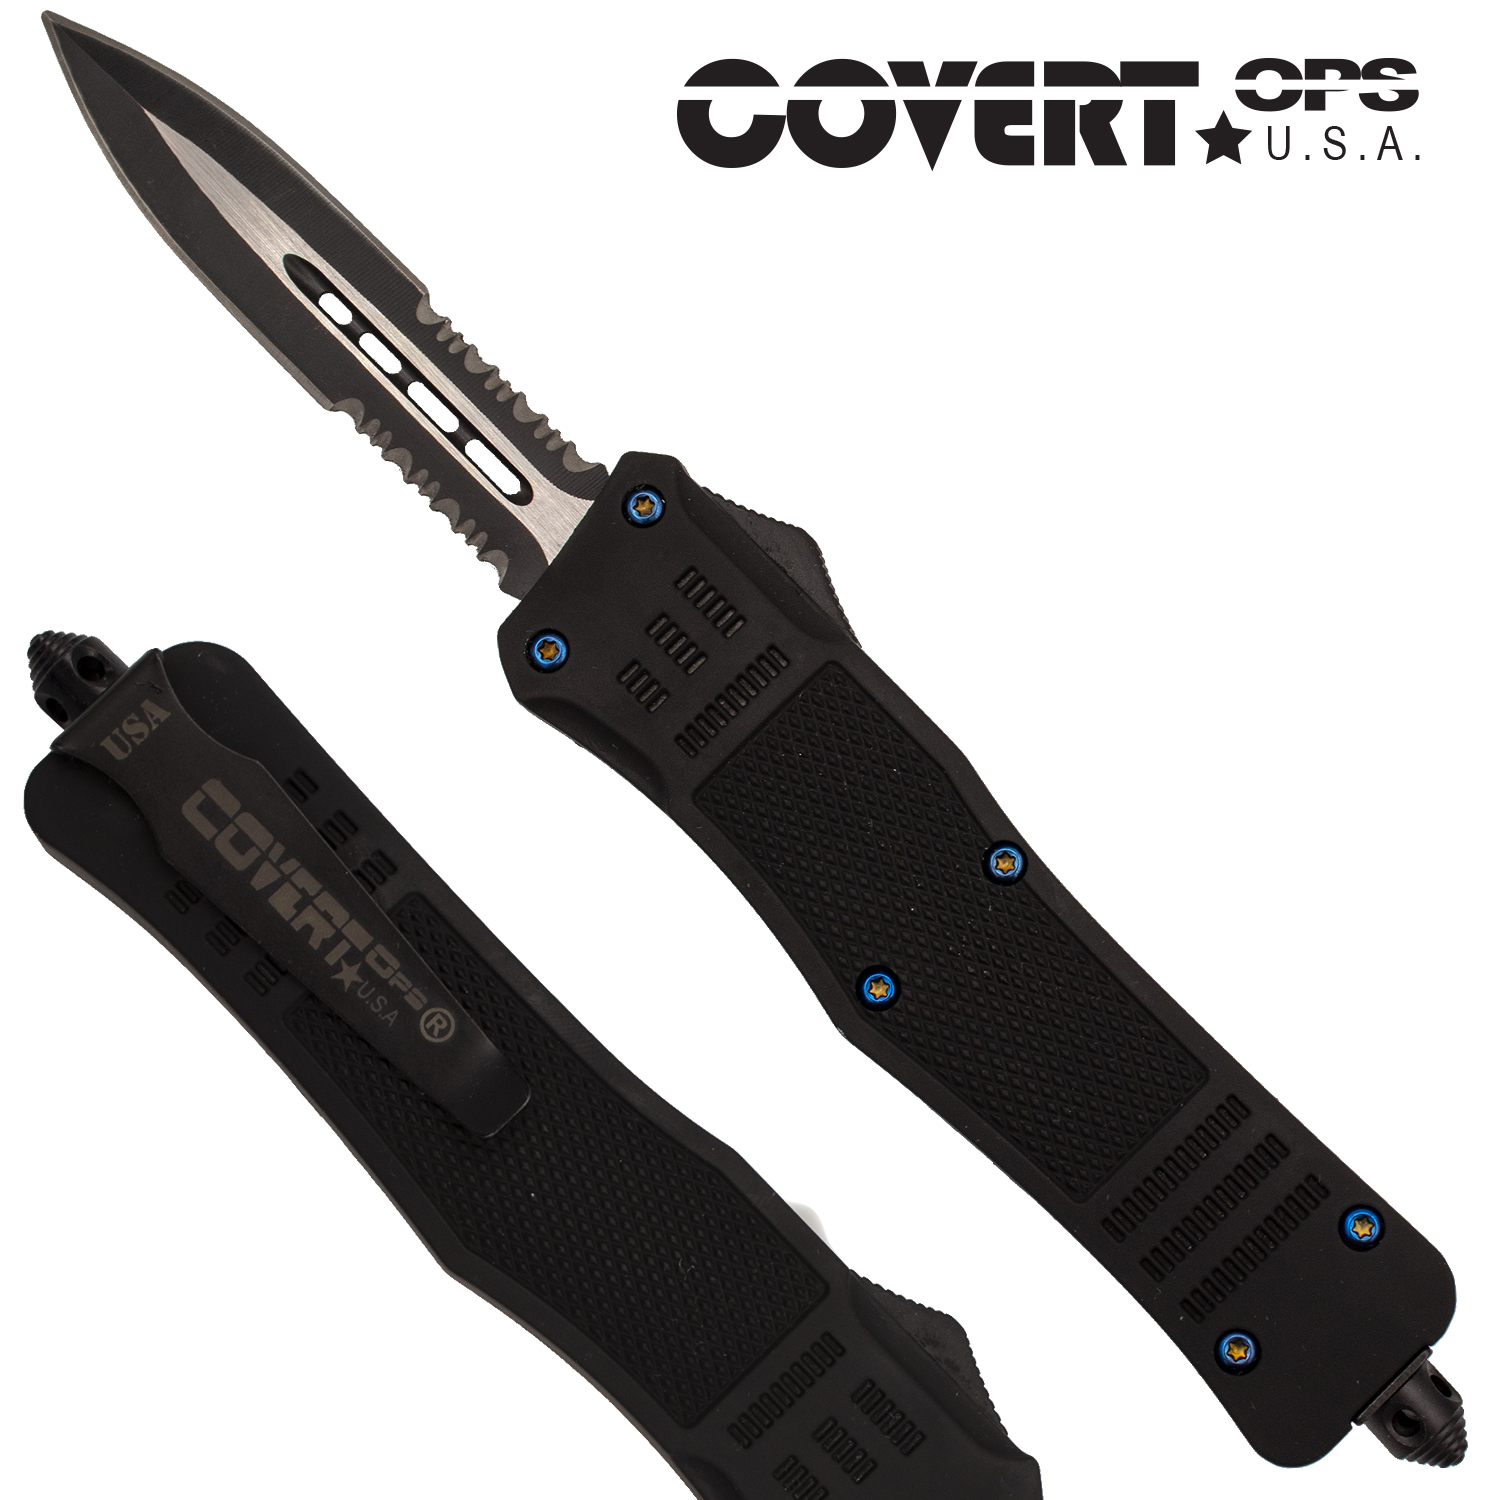 Covert OPS USA OTF Automatic Knife 9 inch overall Black Handle Two Tone Double Edge D2 Steel Blade